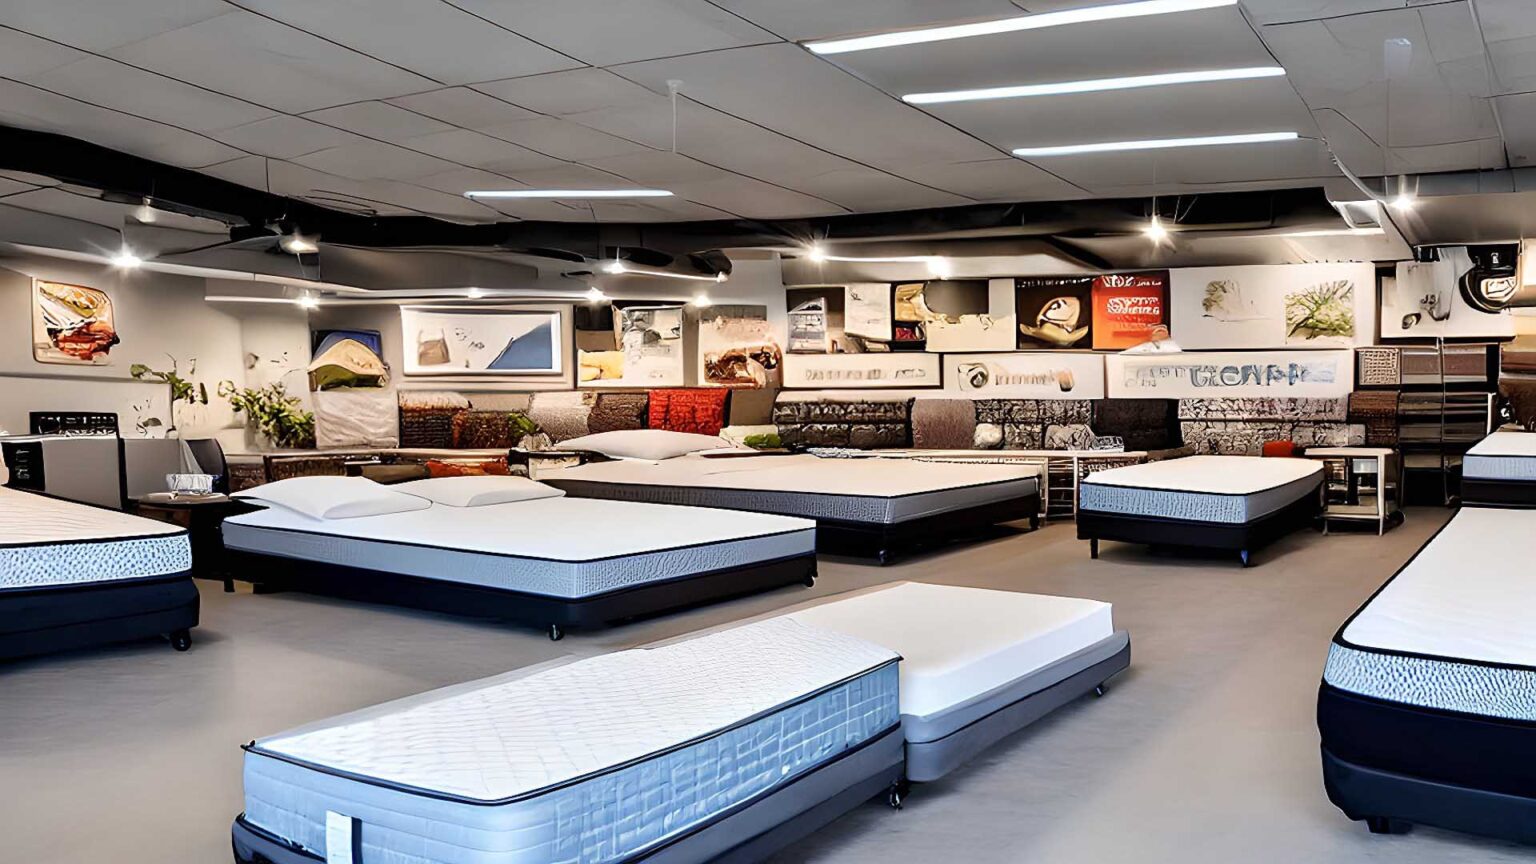 Mattress Stores, mattress dealers, and mattress retailers near me in Coppell, TX